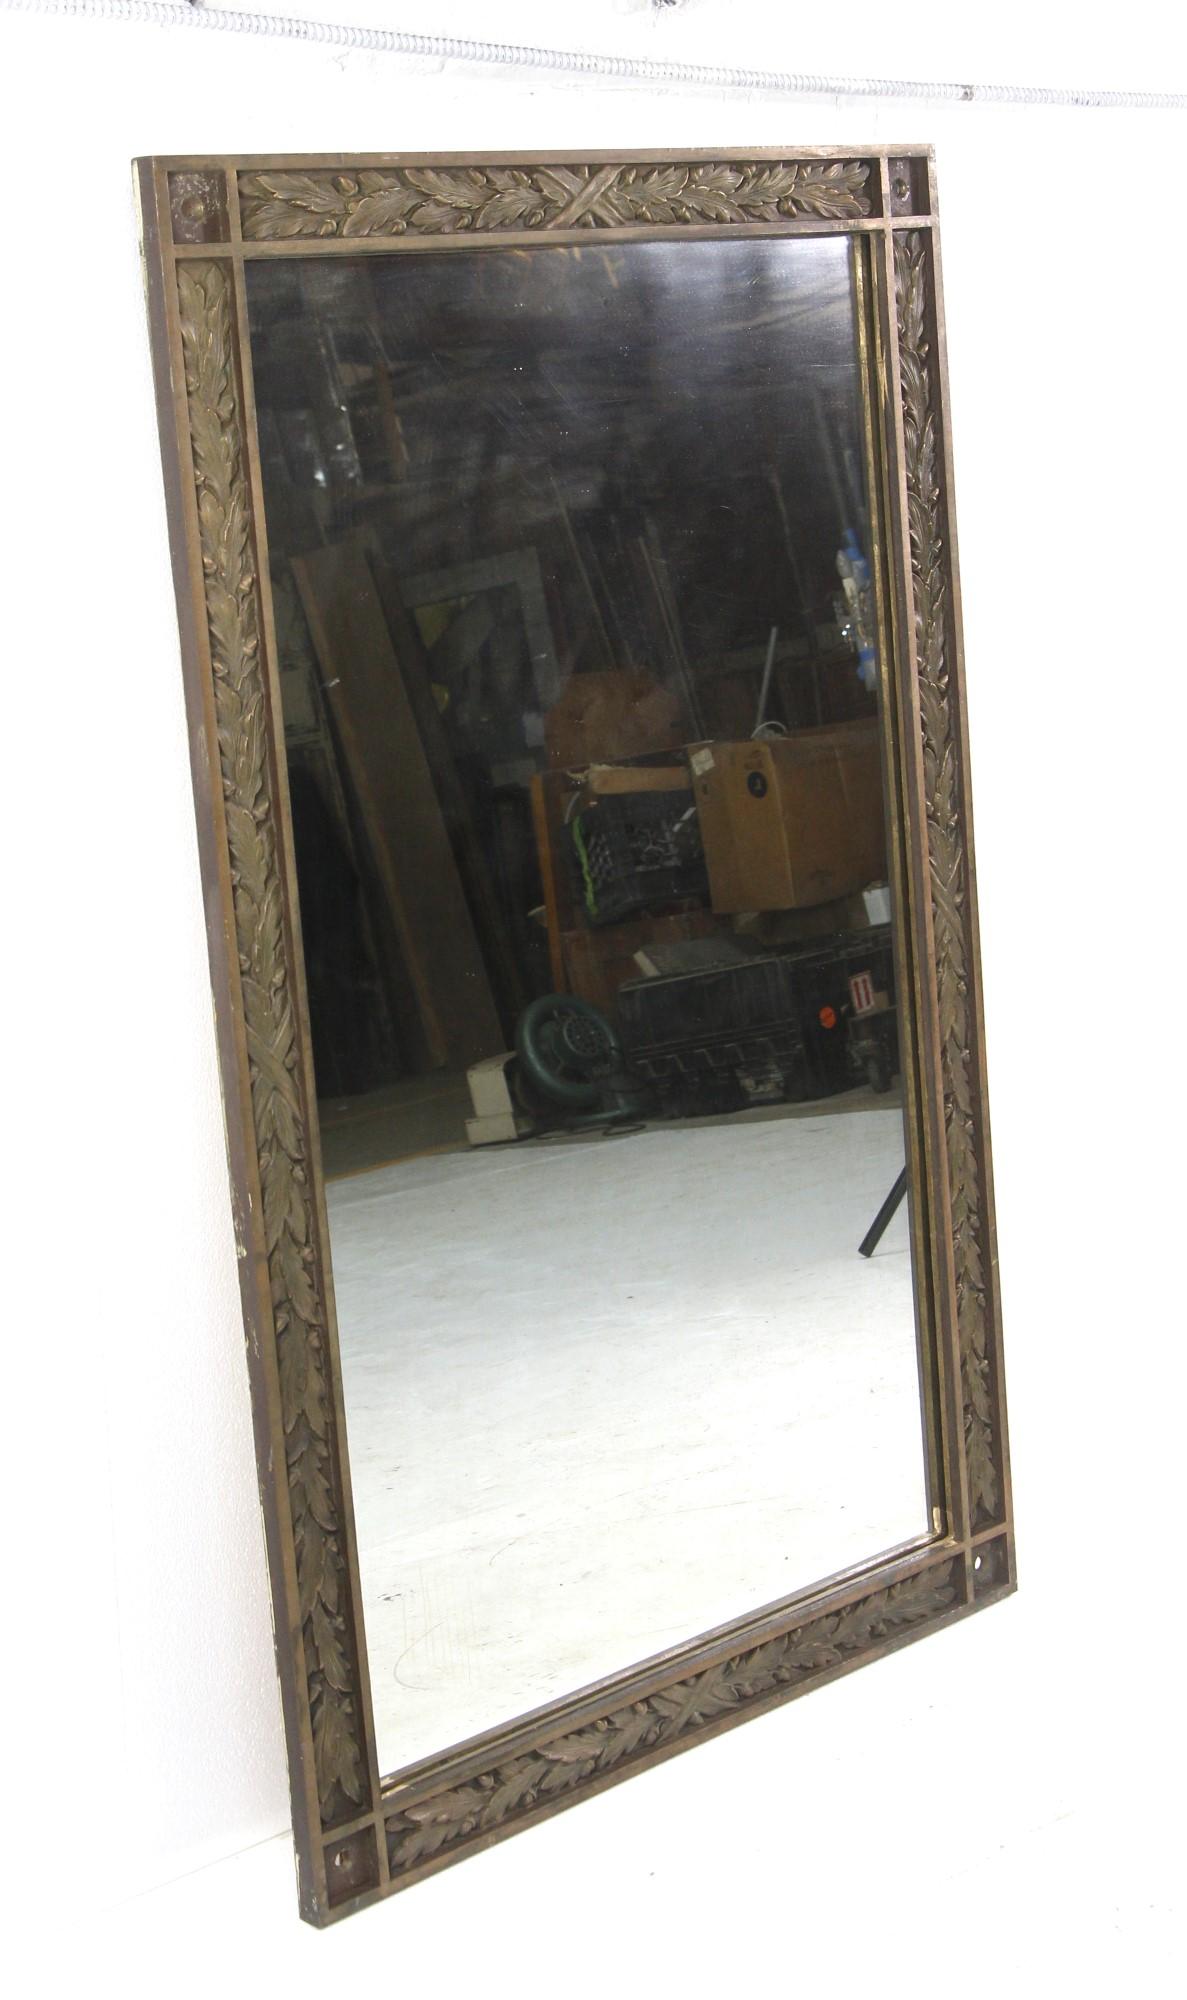 20th Century bronze framed mirror. Designed with a ornate 3D foliage pattern. A distressed mirror rounds out this antique look. Restored with a new wood backing. This can be seen at our 333 West 52nd St location in the Theater District West of